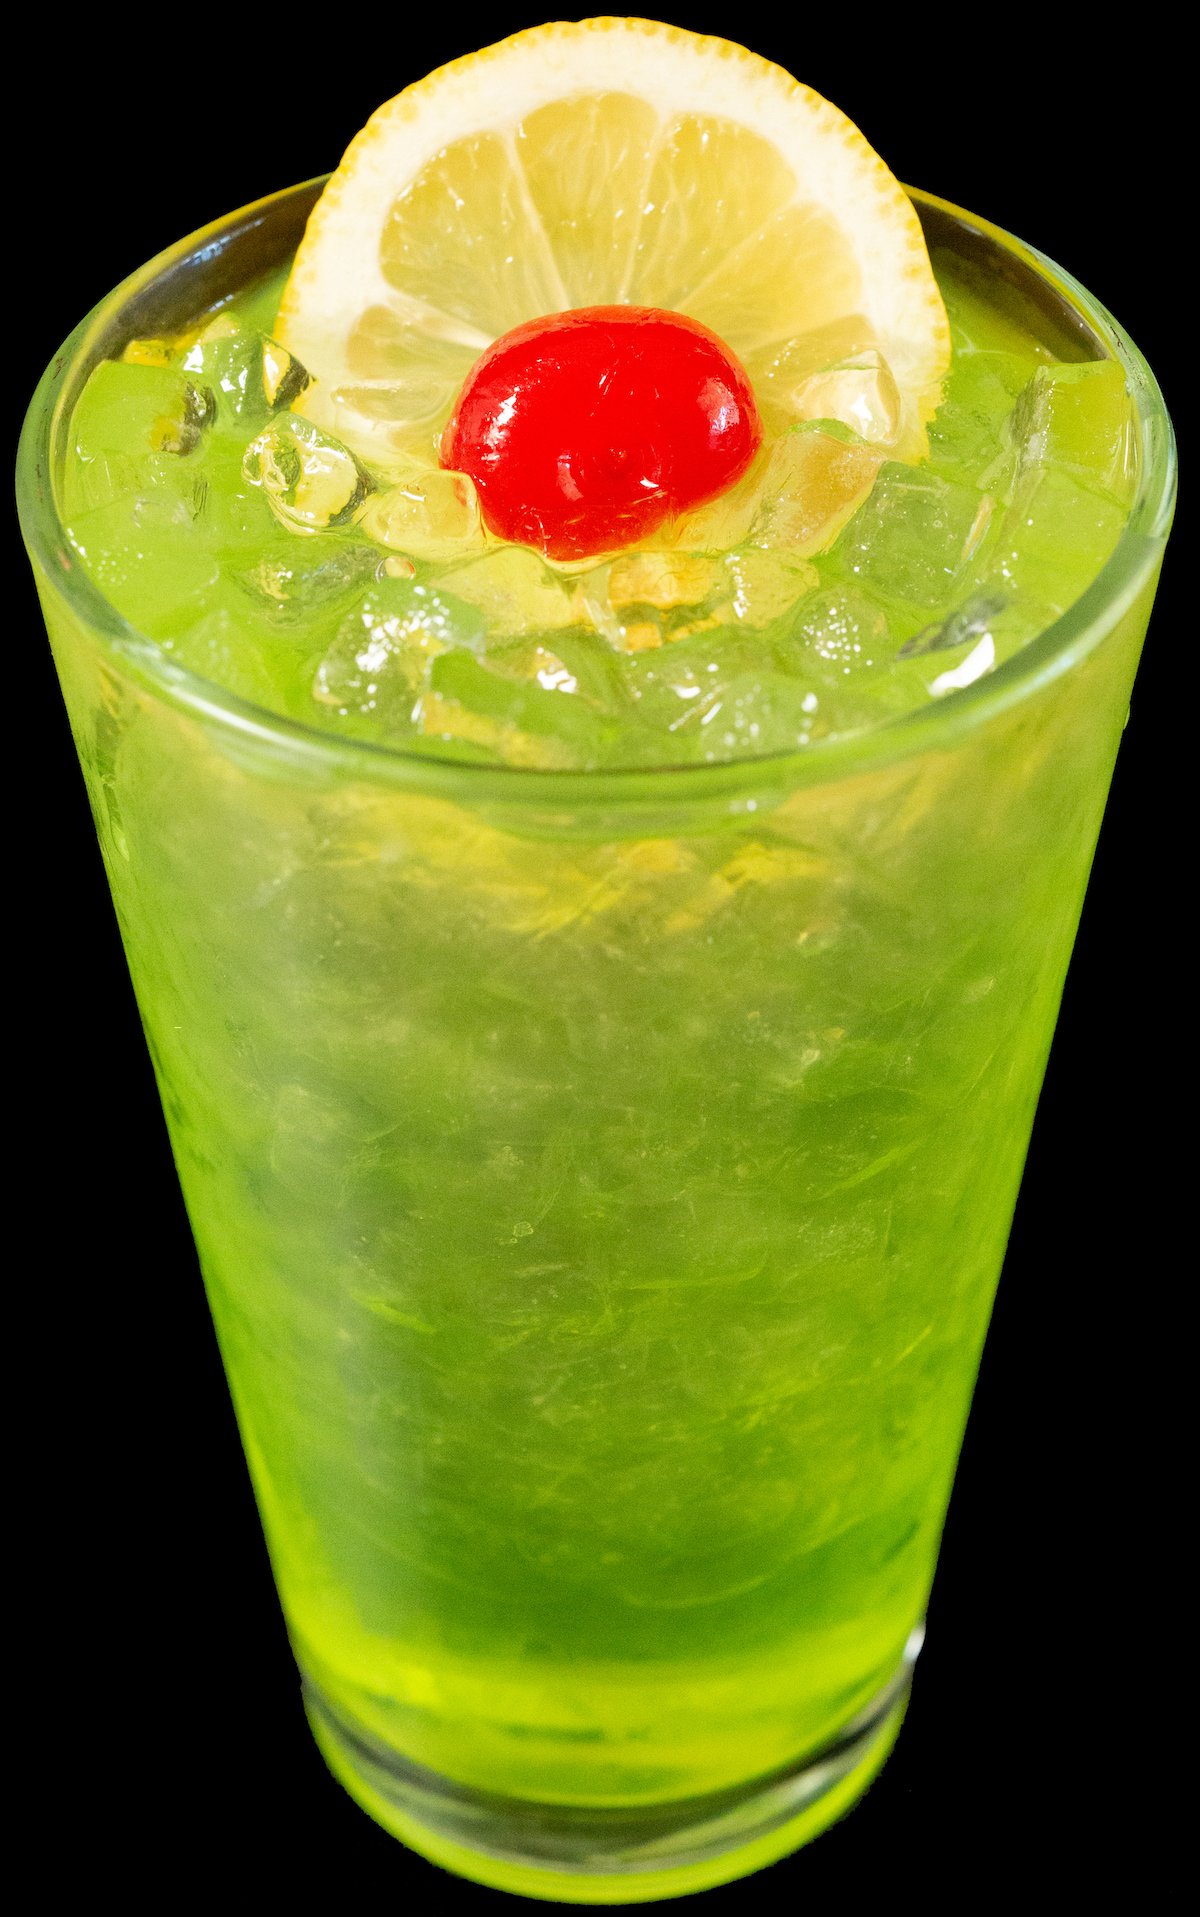 A pint glass filled with a neon green Tokyo Iced Tea cocktail garnished with a lemon wheel and maraschino cherry.